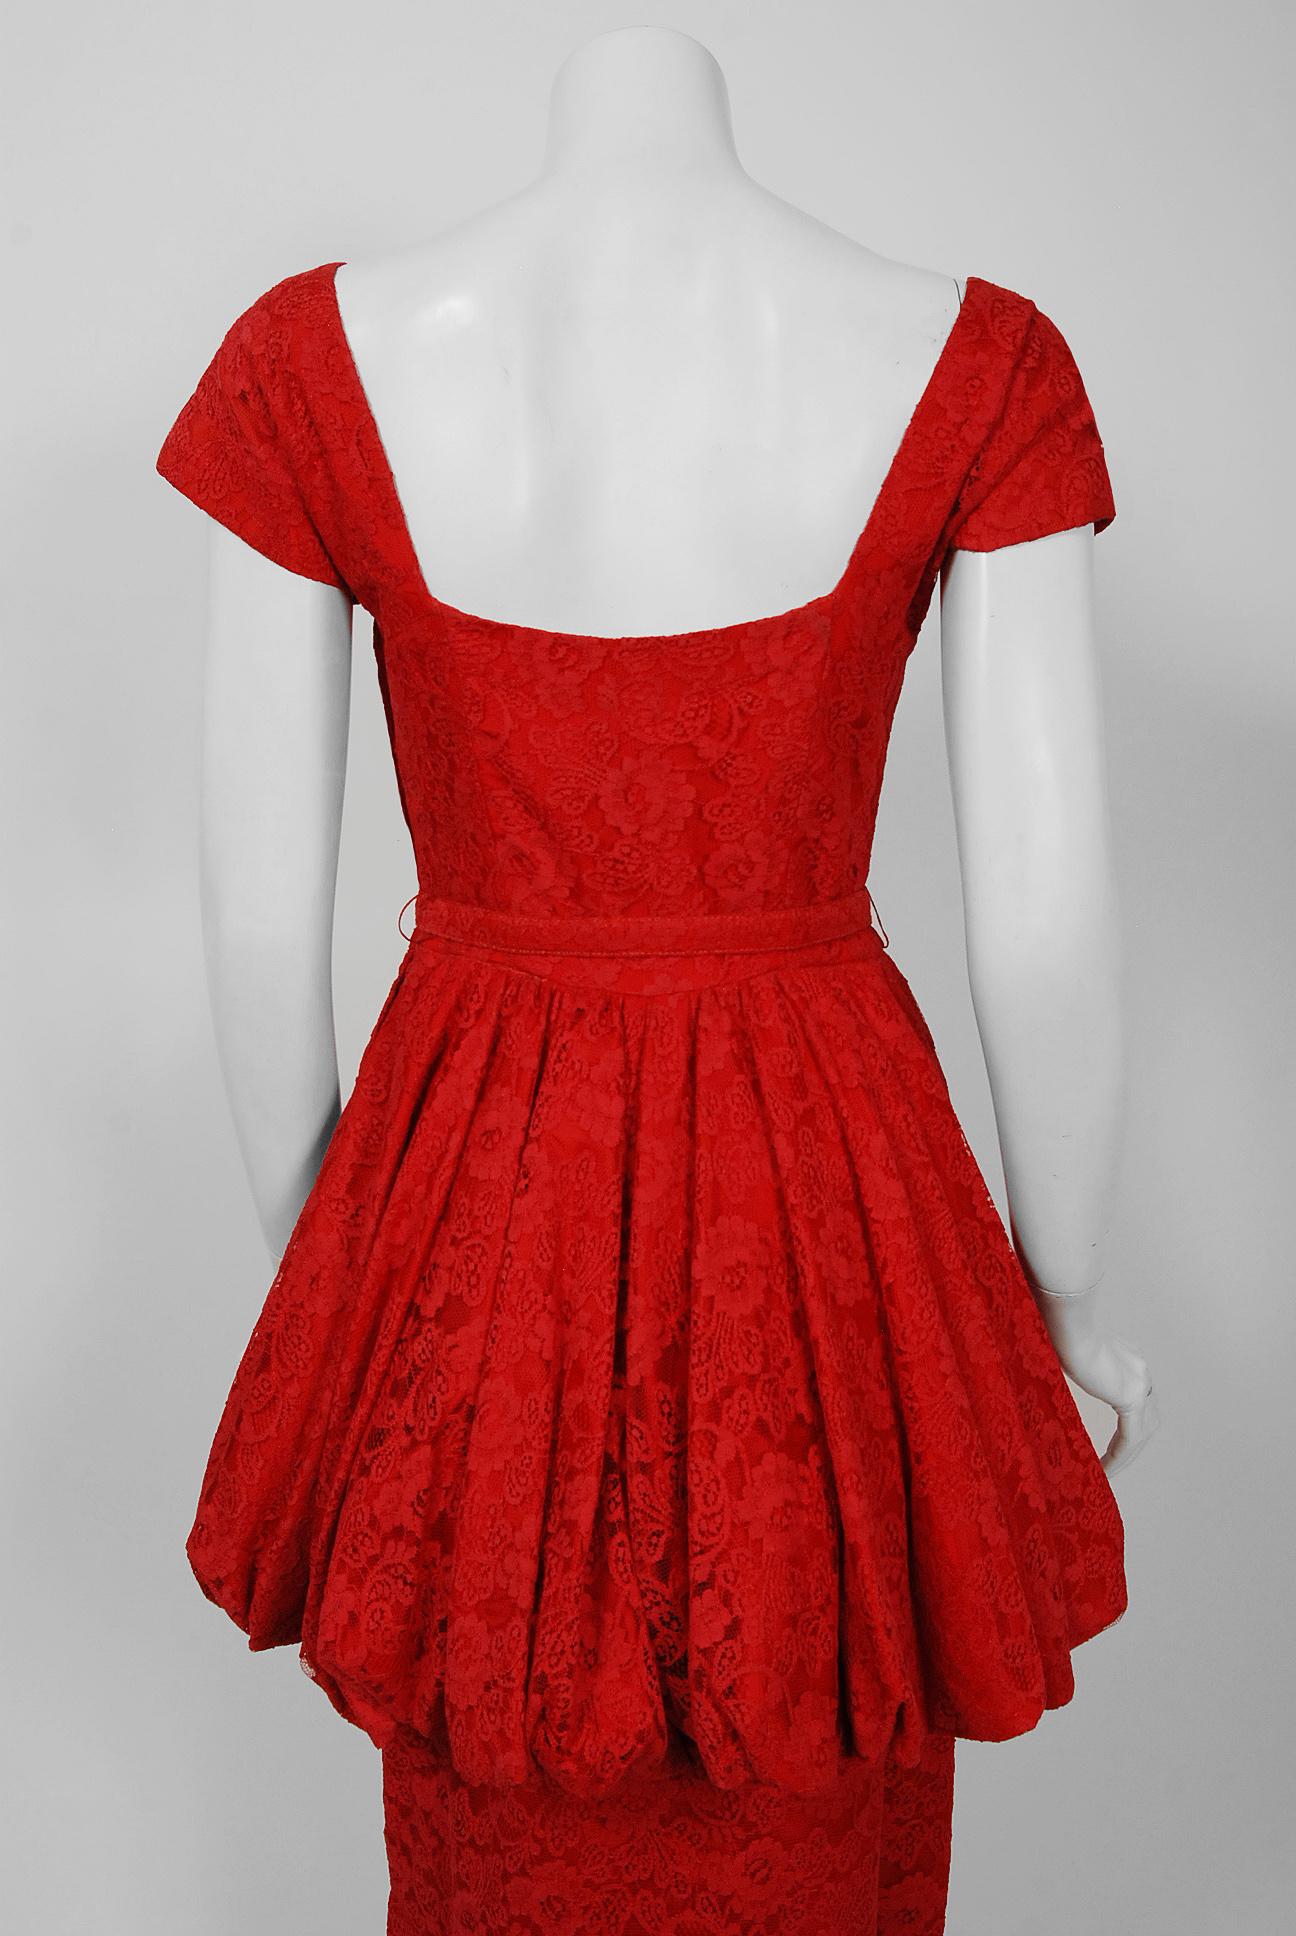 Women's Vintage 1950's Perdieu Cherry-Red Lace Sweetheart Belted Peplum Cocktail Dress 